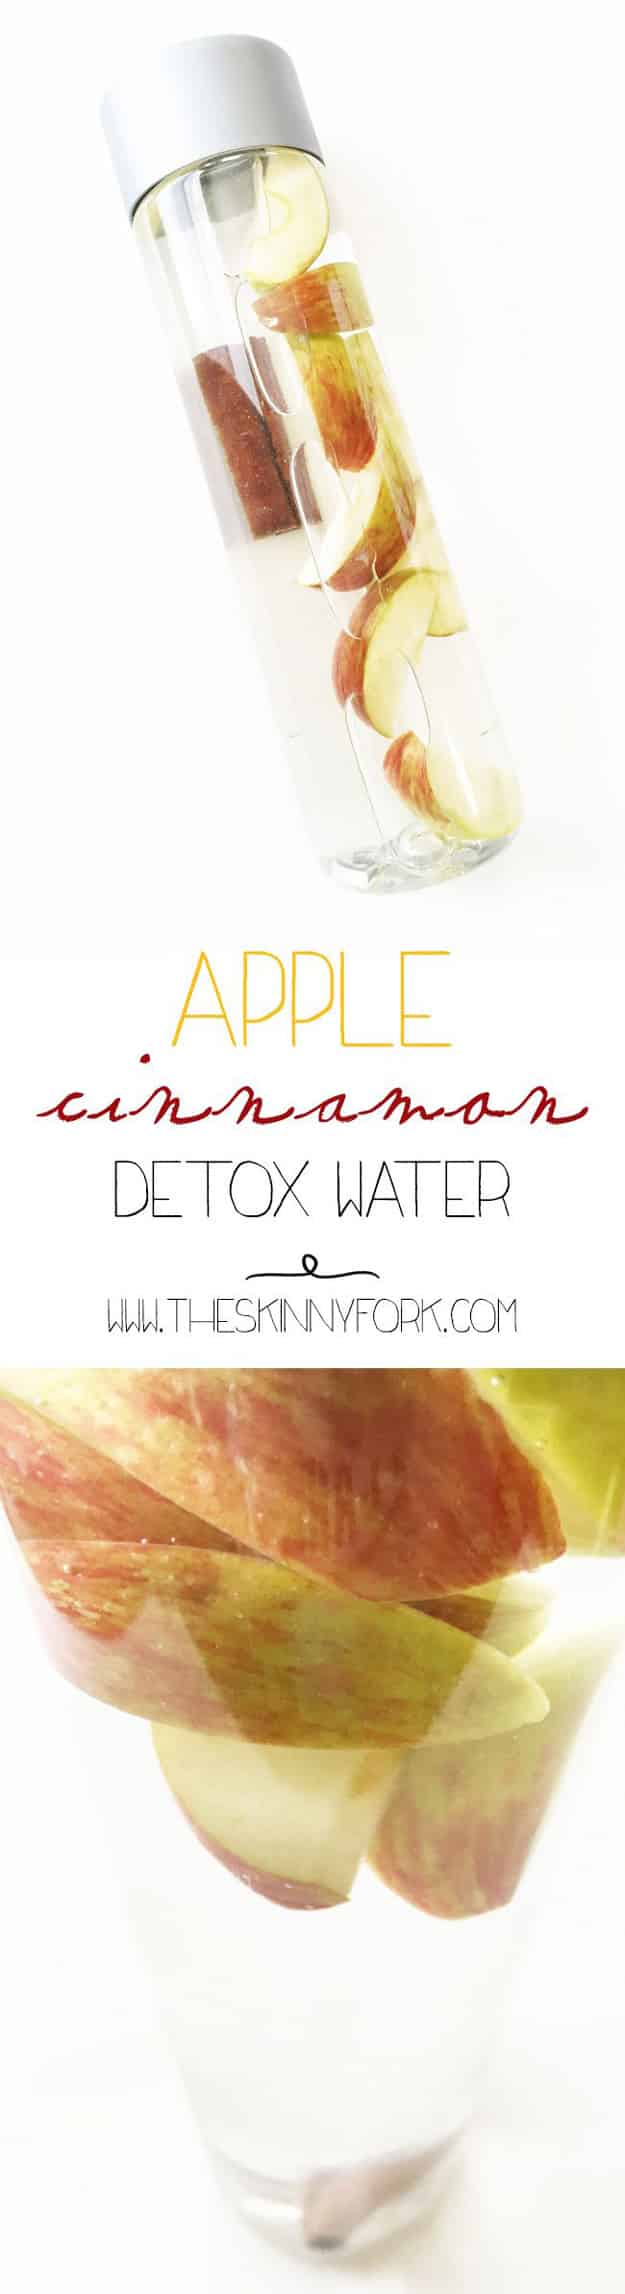 31 Detox Water Recipes for Drinks To Cleanse Skin and Body. Easy to Make Waters and Tea Promote Health, Diet and Support Weightloss | Apple Cinnamon Detox Water Recipe